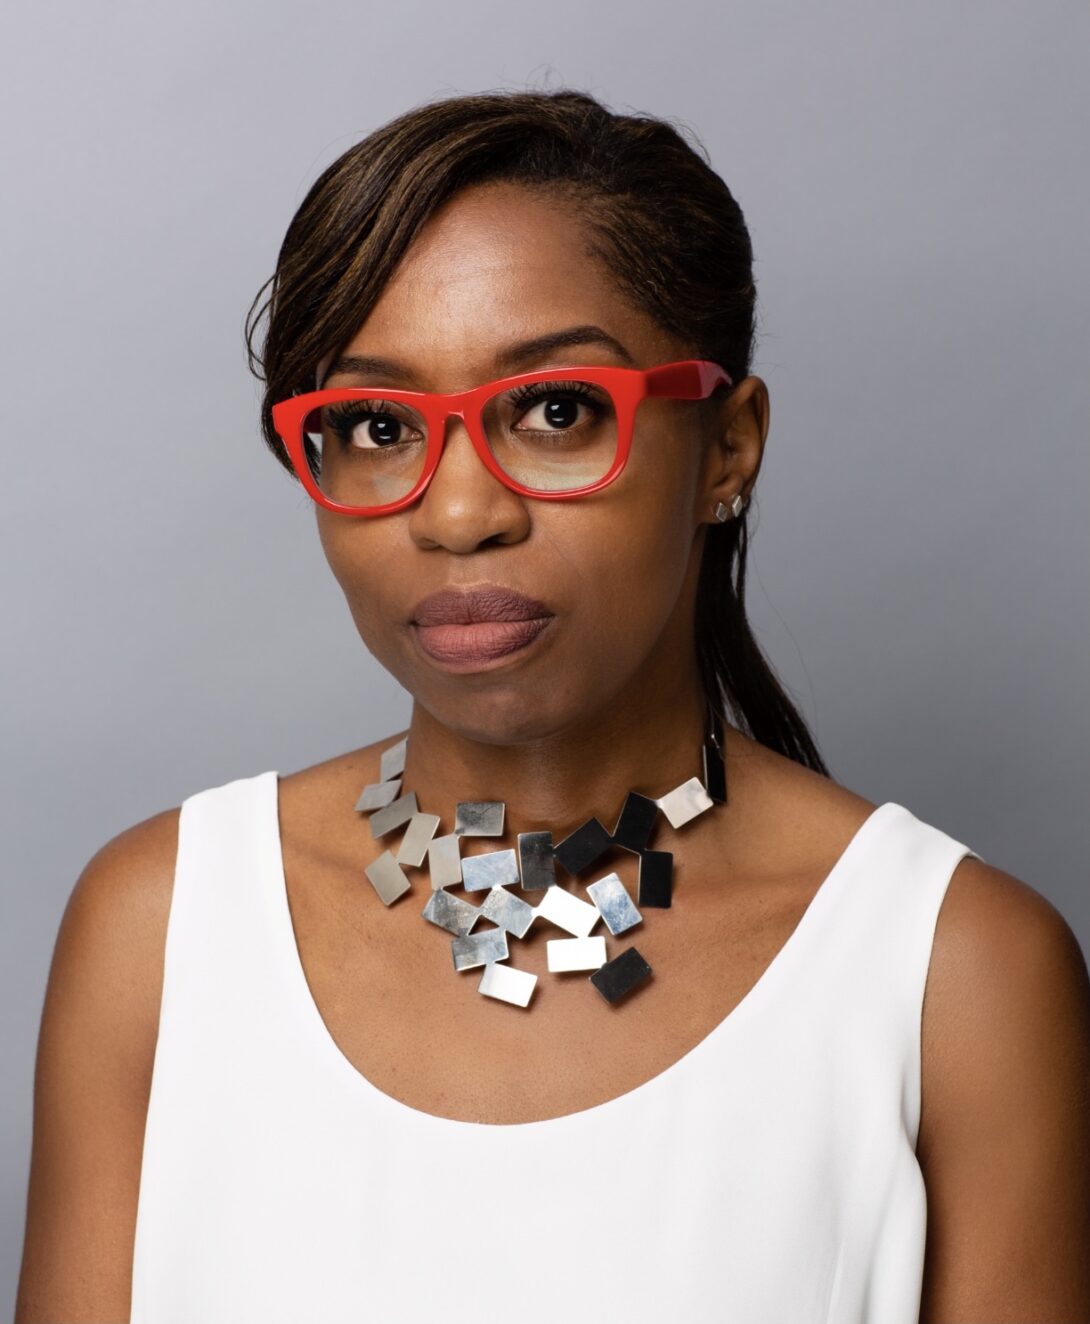 In this headshot, a person with a white tank top and red glasses looks at the camera.